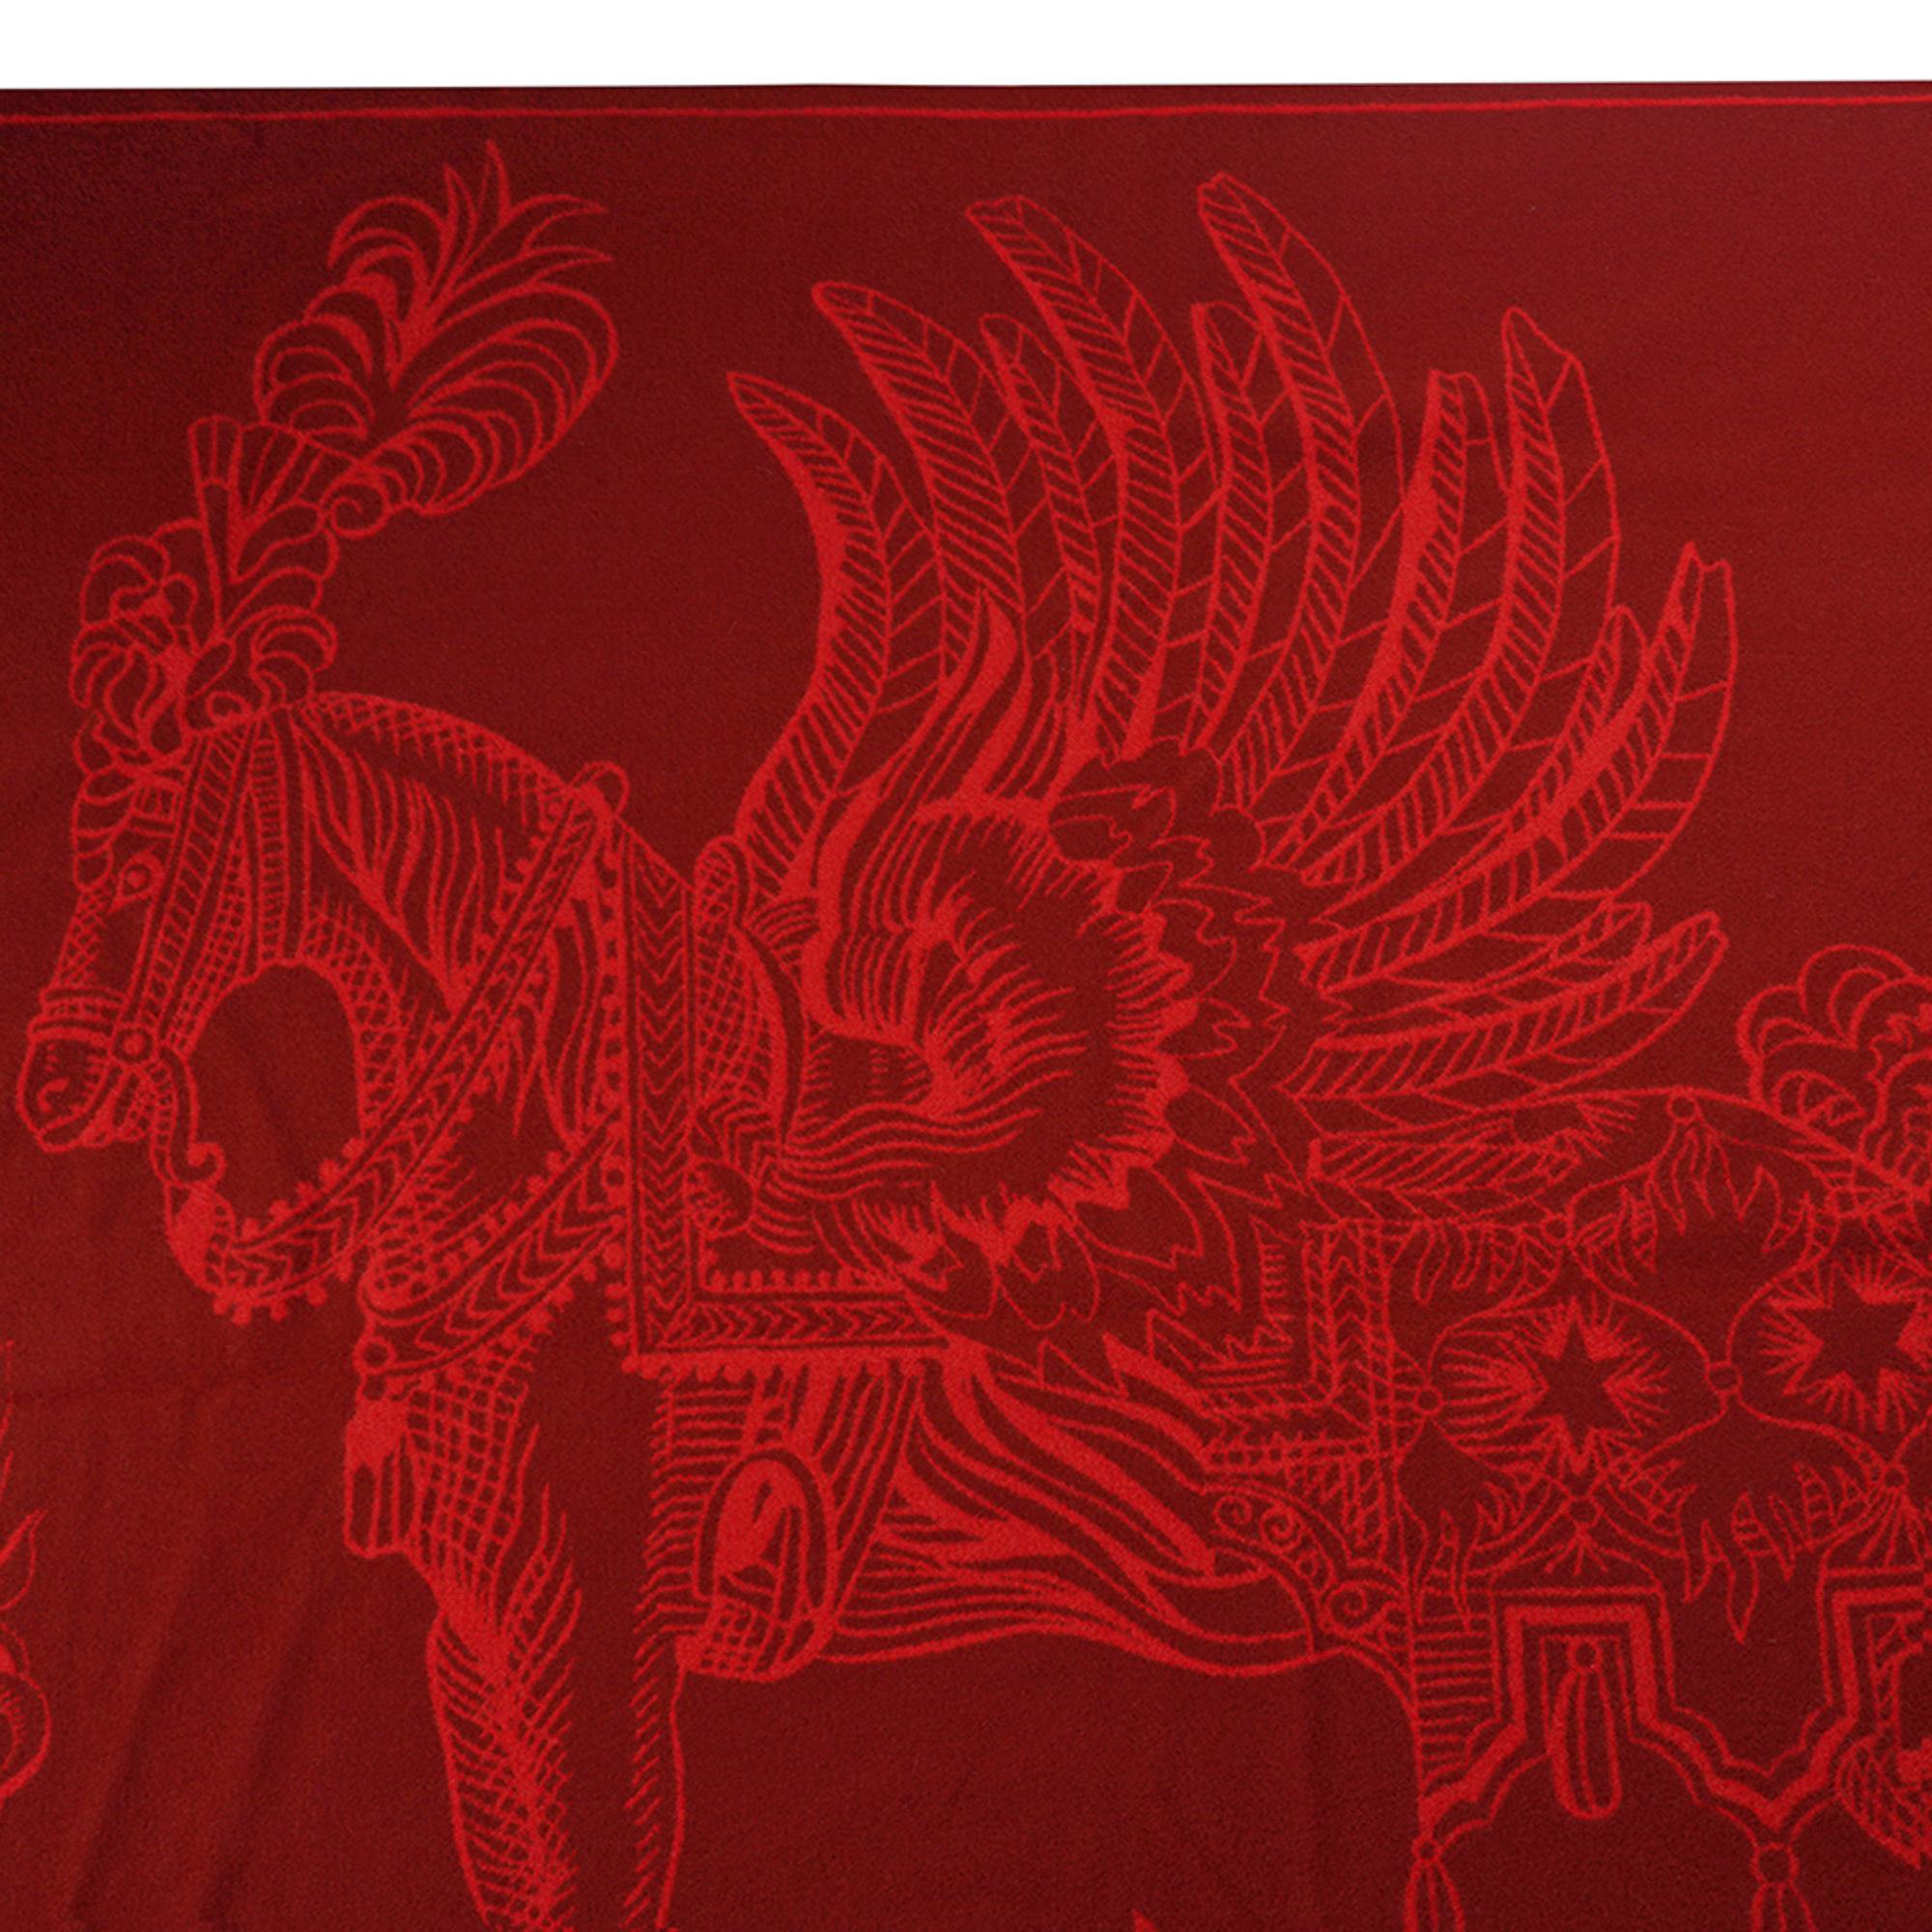 Mightychic offers a guaranteed authentic Hermes Della Cavalleria Favolosa blanket featured in Rubis and Rouge H.
Jacquard woven 72% cashmere and 28% wool is edged with fringe.
This extraordinary equestrian composition is spectacular.
Designed by